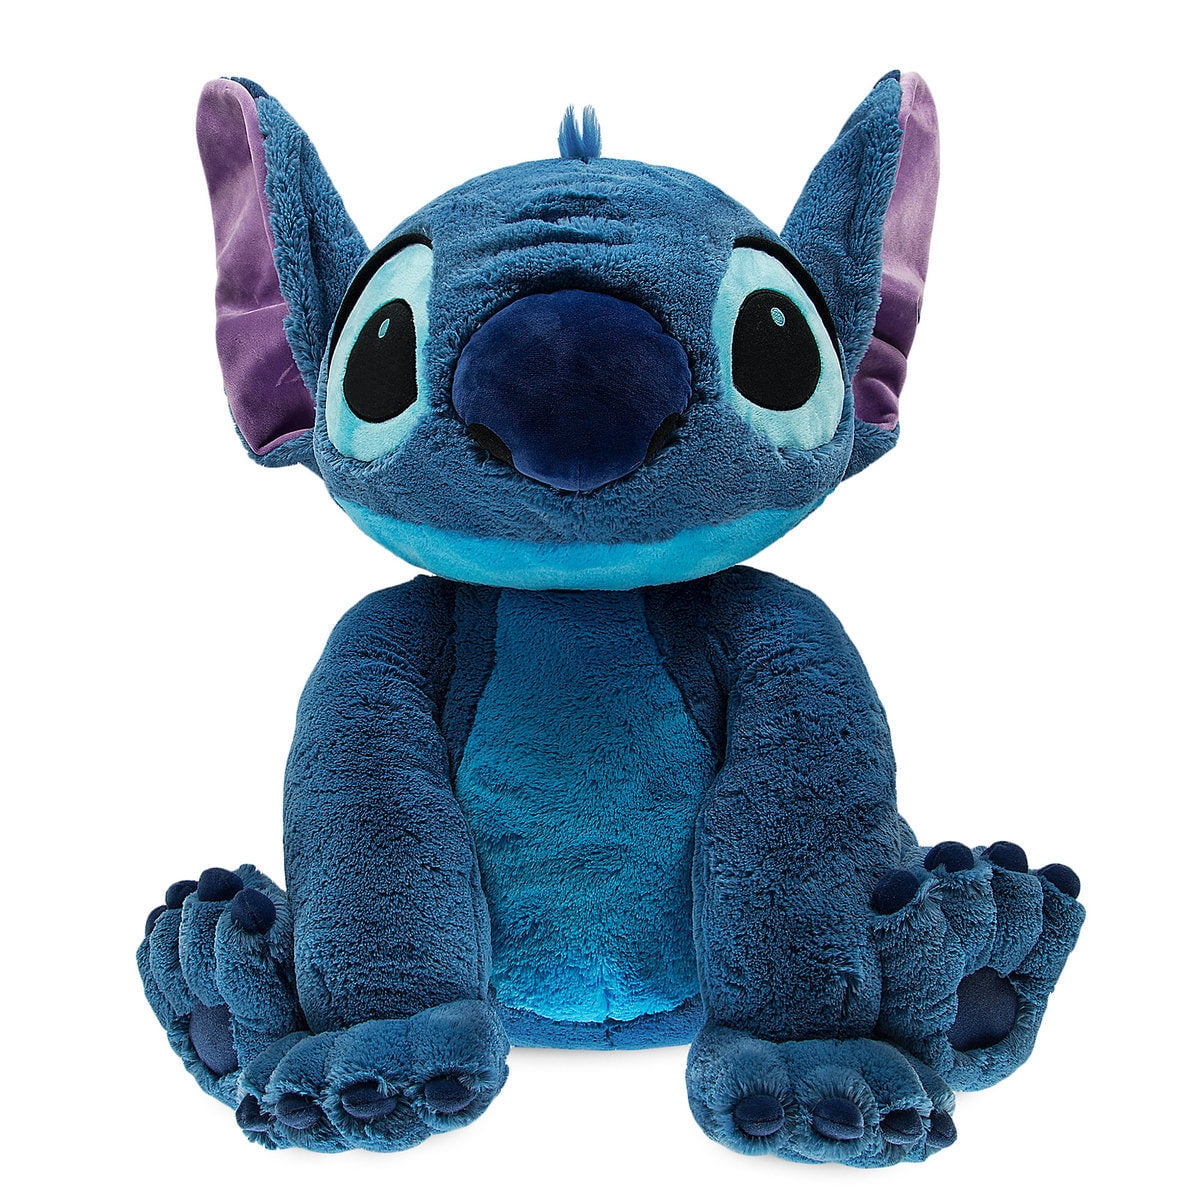 STITCH Disney’s Lilo Plush Stuffed Animal 3-piece Set, Alien, Officially  Licensed Kids Toys for Ages 0+ by Just Play